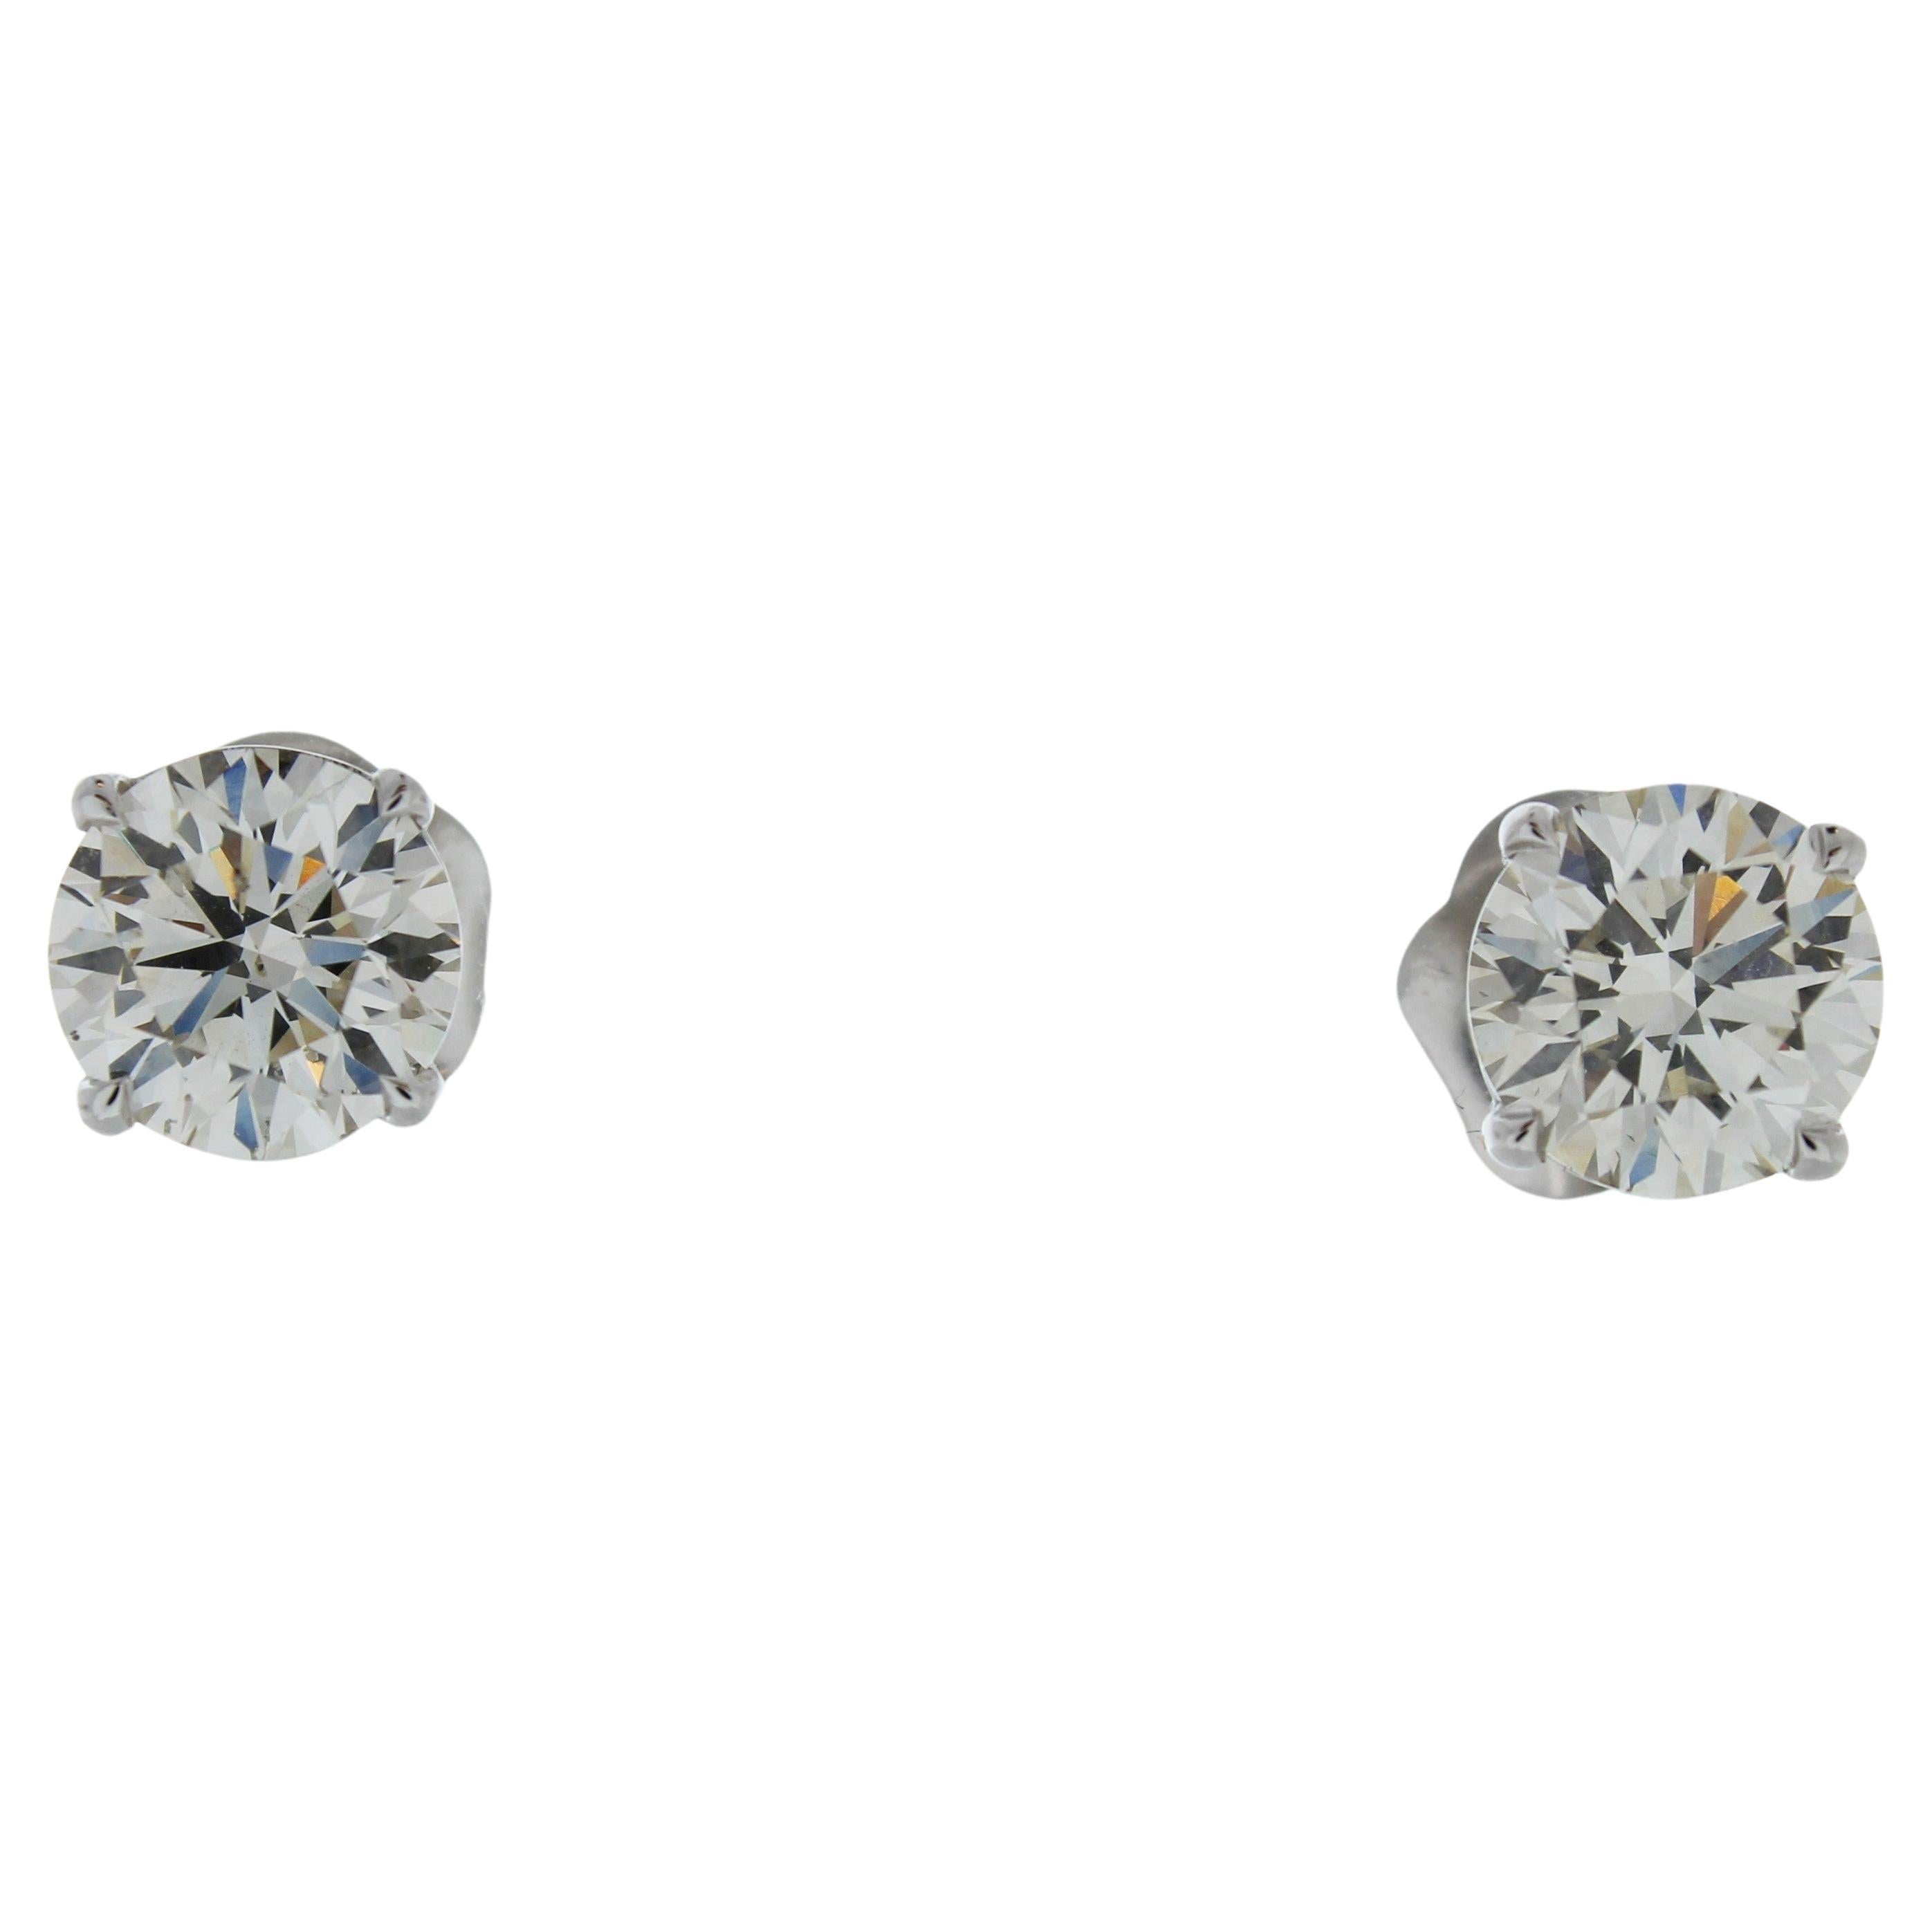 4.74 Total Carat Weight EGL Certified Round Diamond Studs In 14k White Gold For Sale